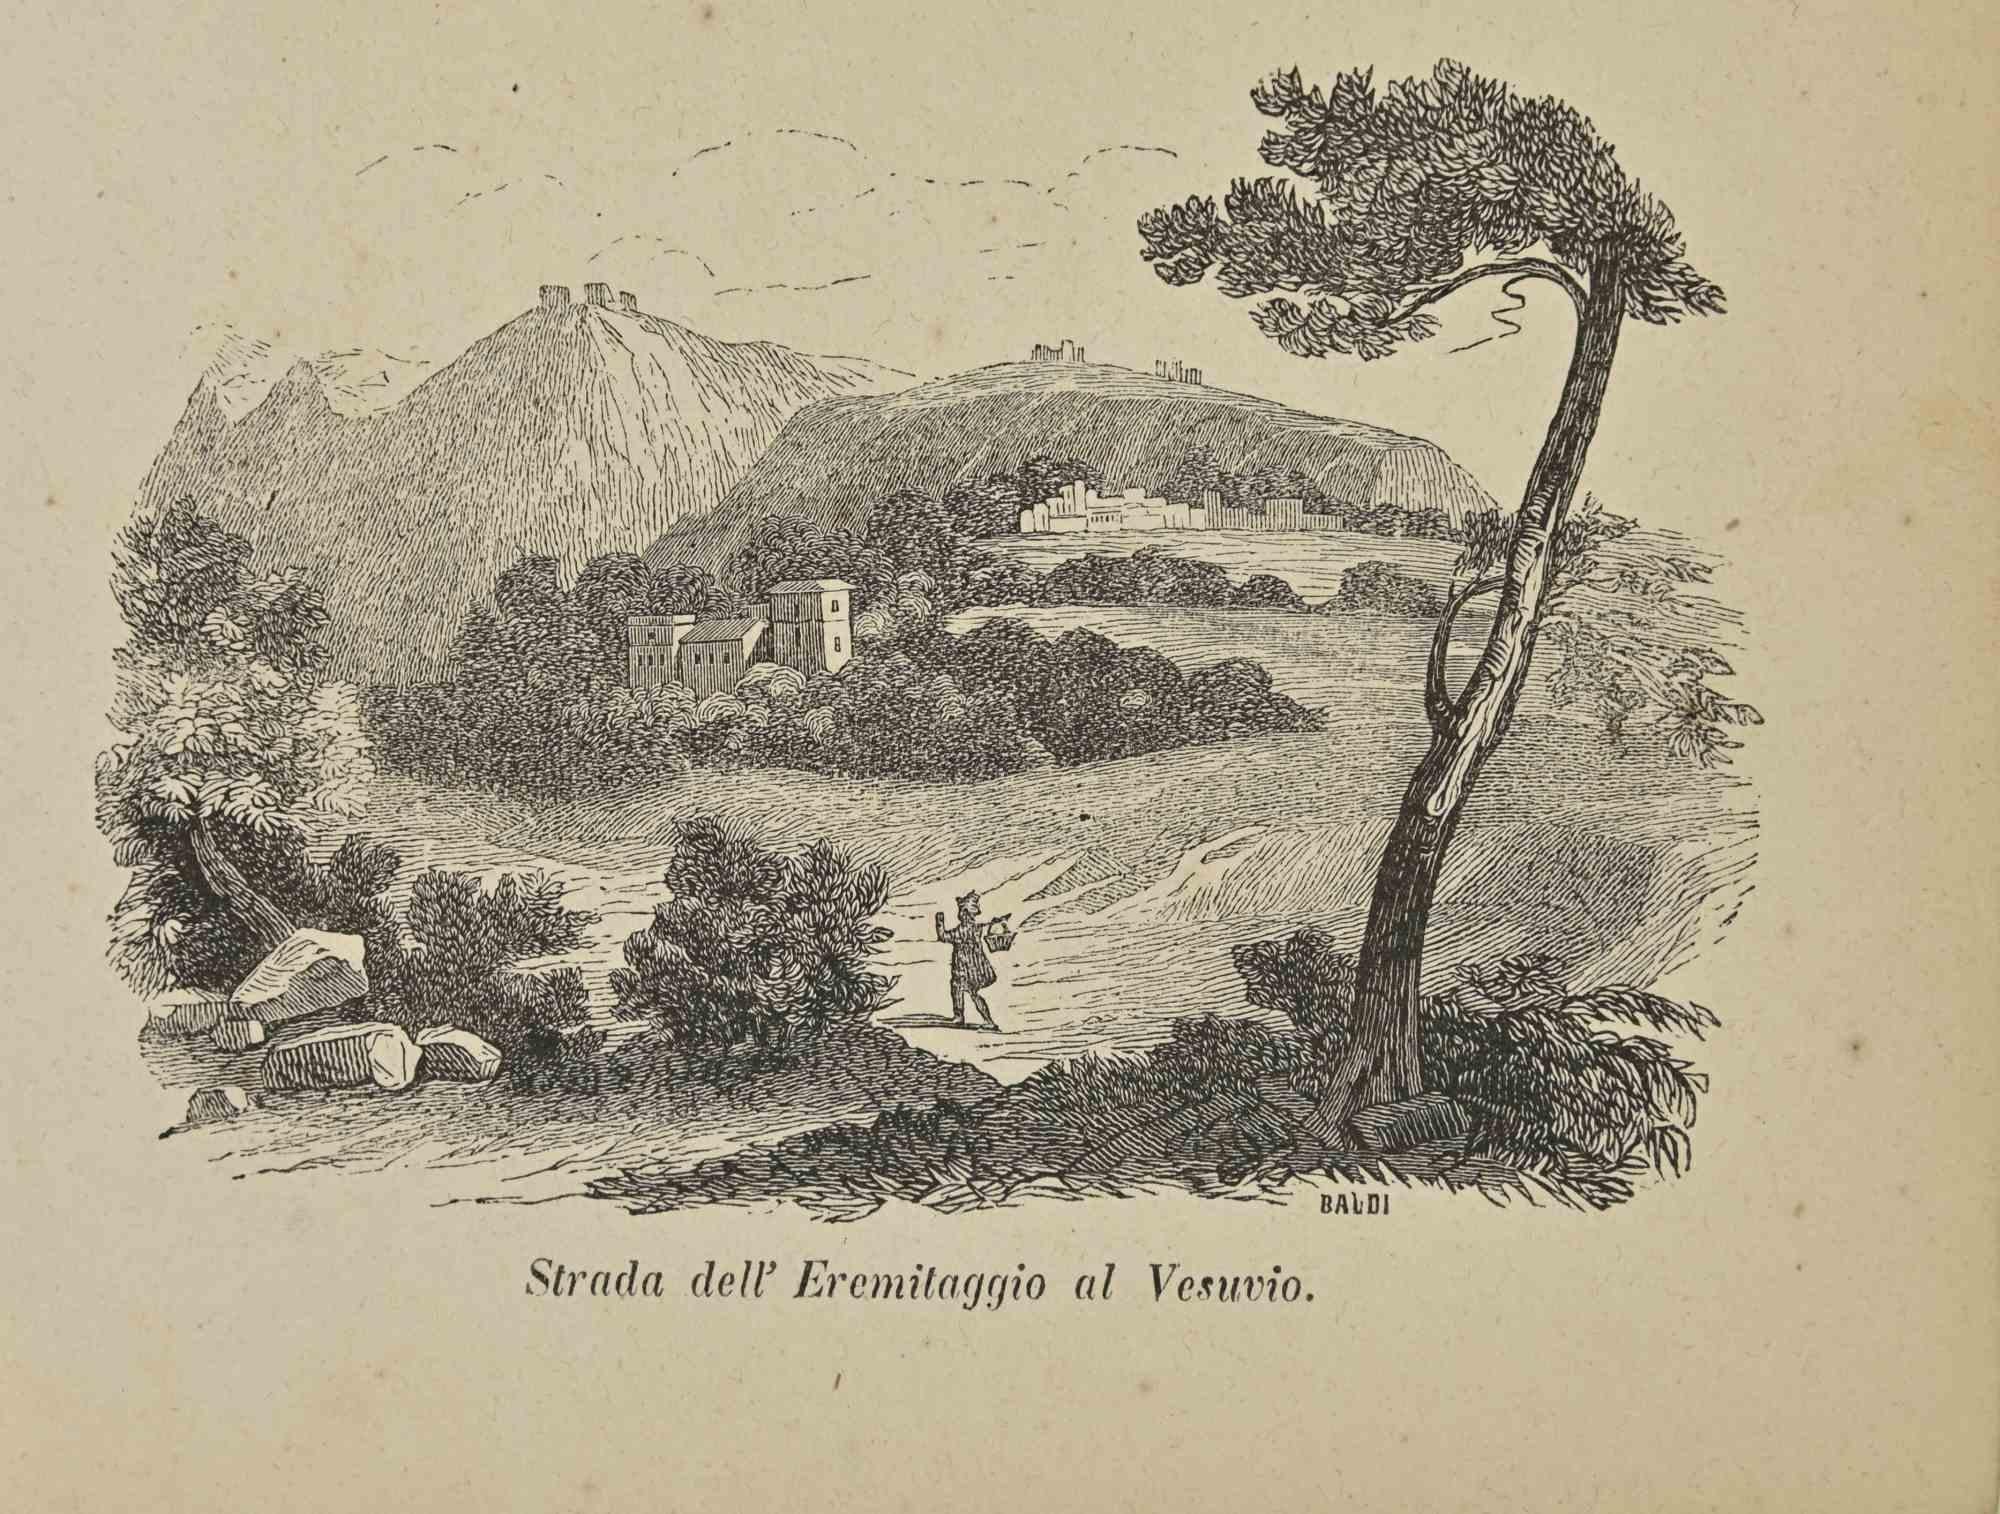 Uses and Customs - Road of Hermitage to Vesuvius - Lithograph - 1862